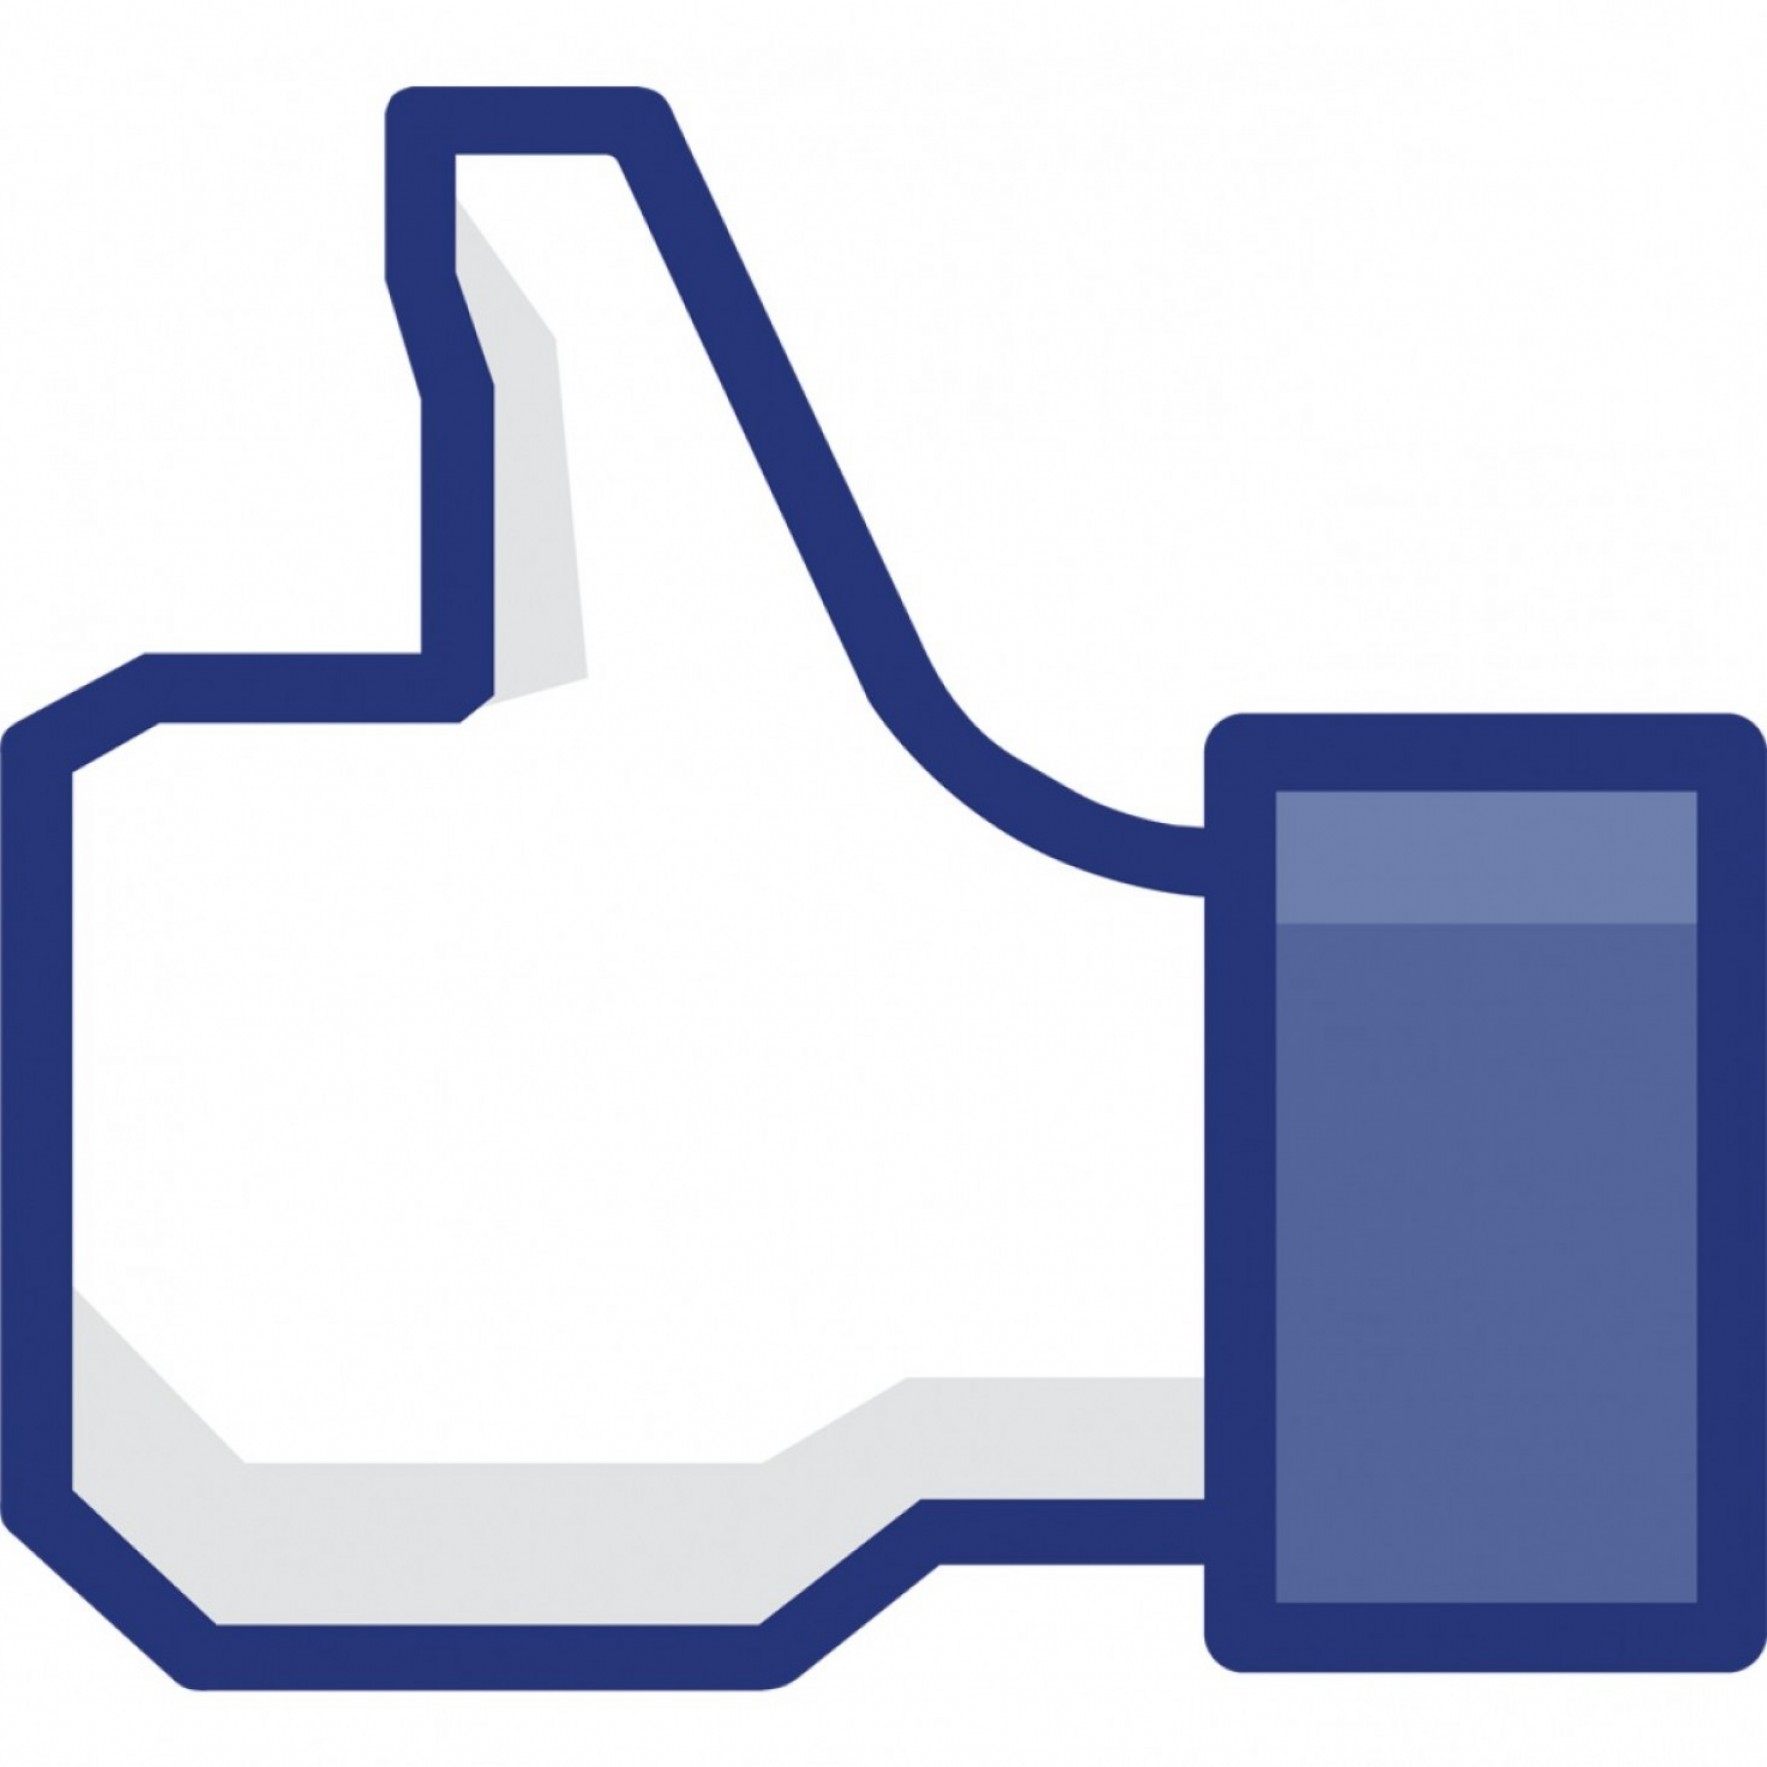 Download Like Button Vector at Vectorified.com | Collection of Like ...